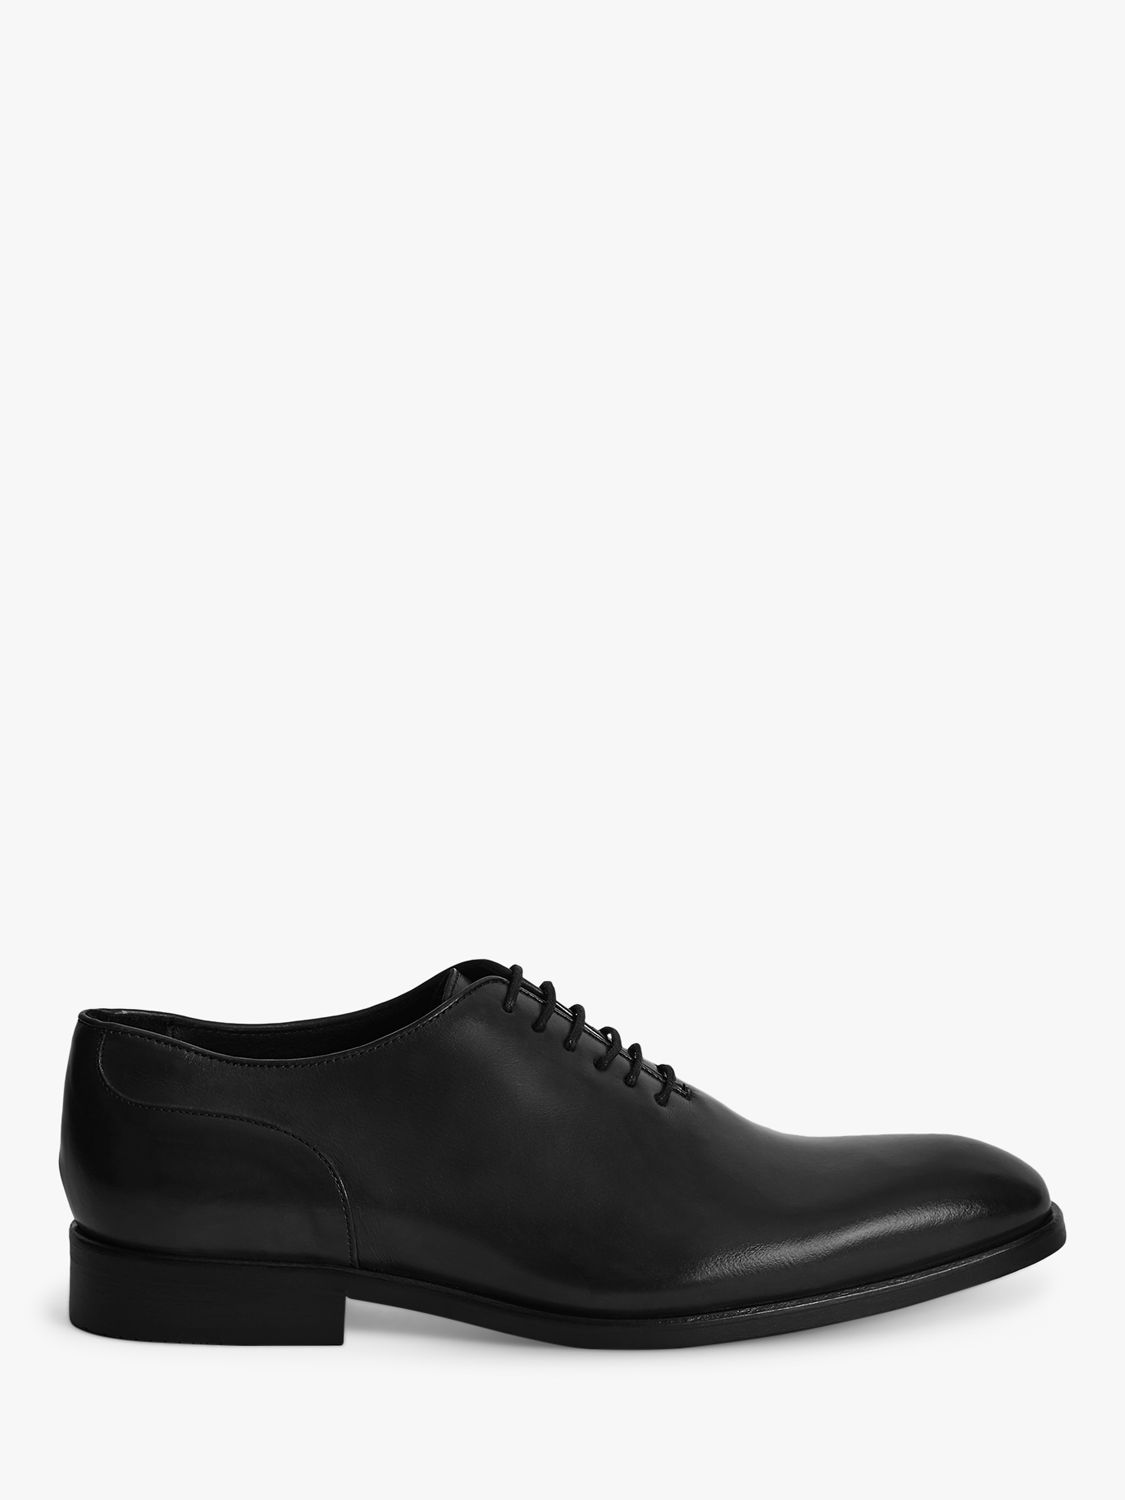 Reiss Bay Leather Whole Cut Shoes, Black